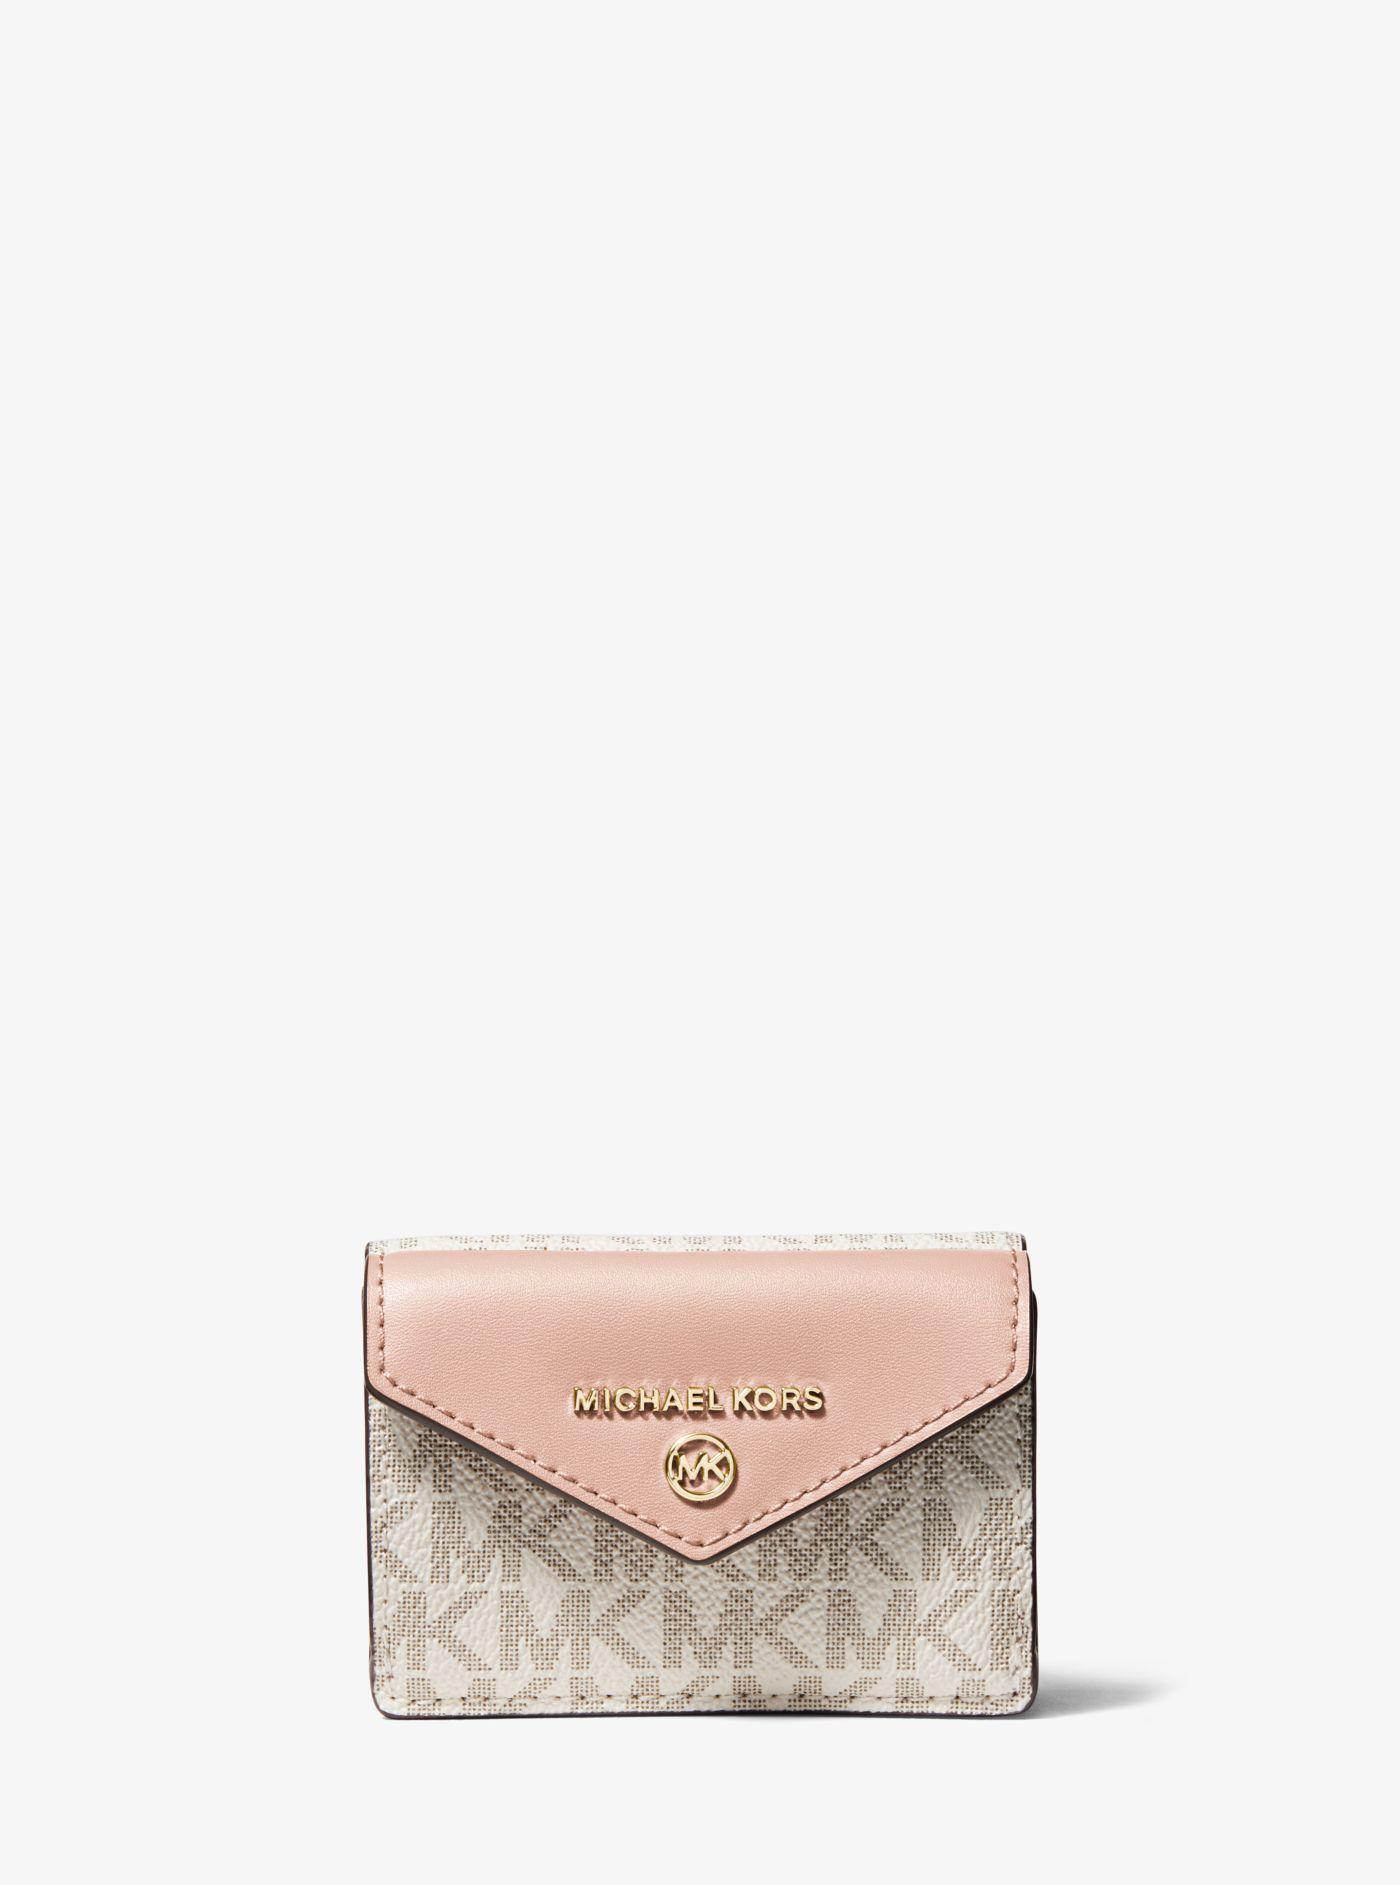 Michael Kors Jet Set Charm Small Logo And Leather Envelope Trifold Wallet  in Natural | Lyst